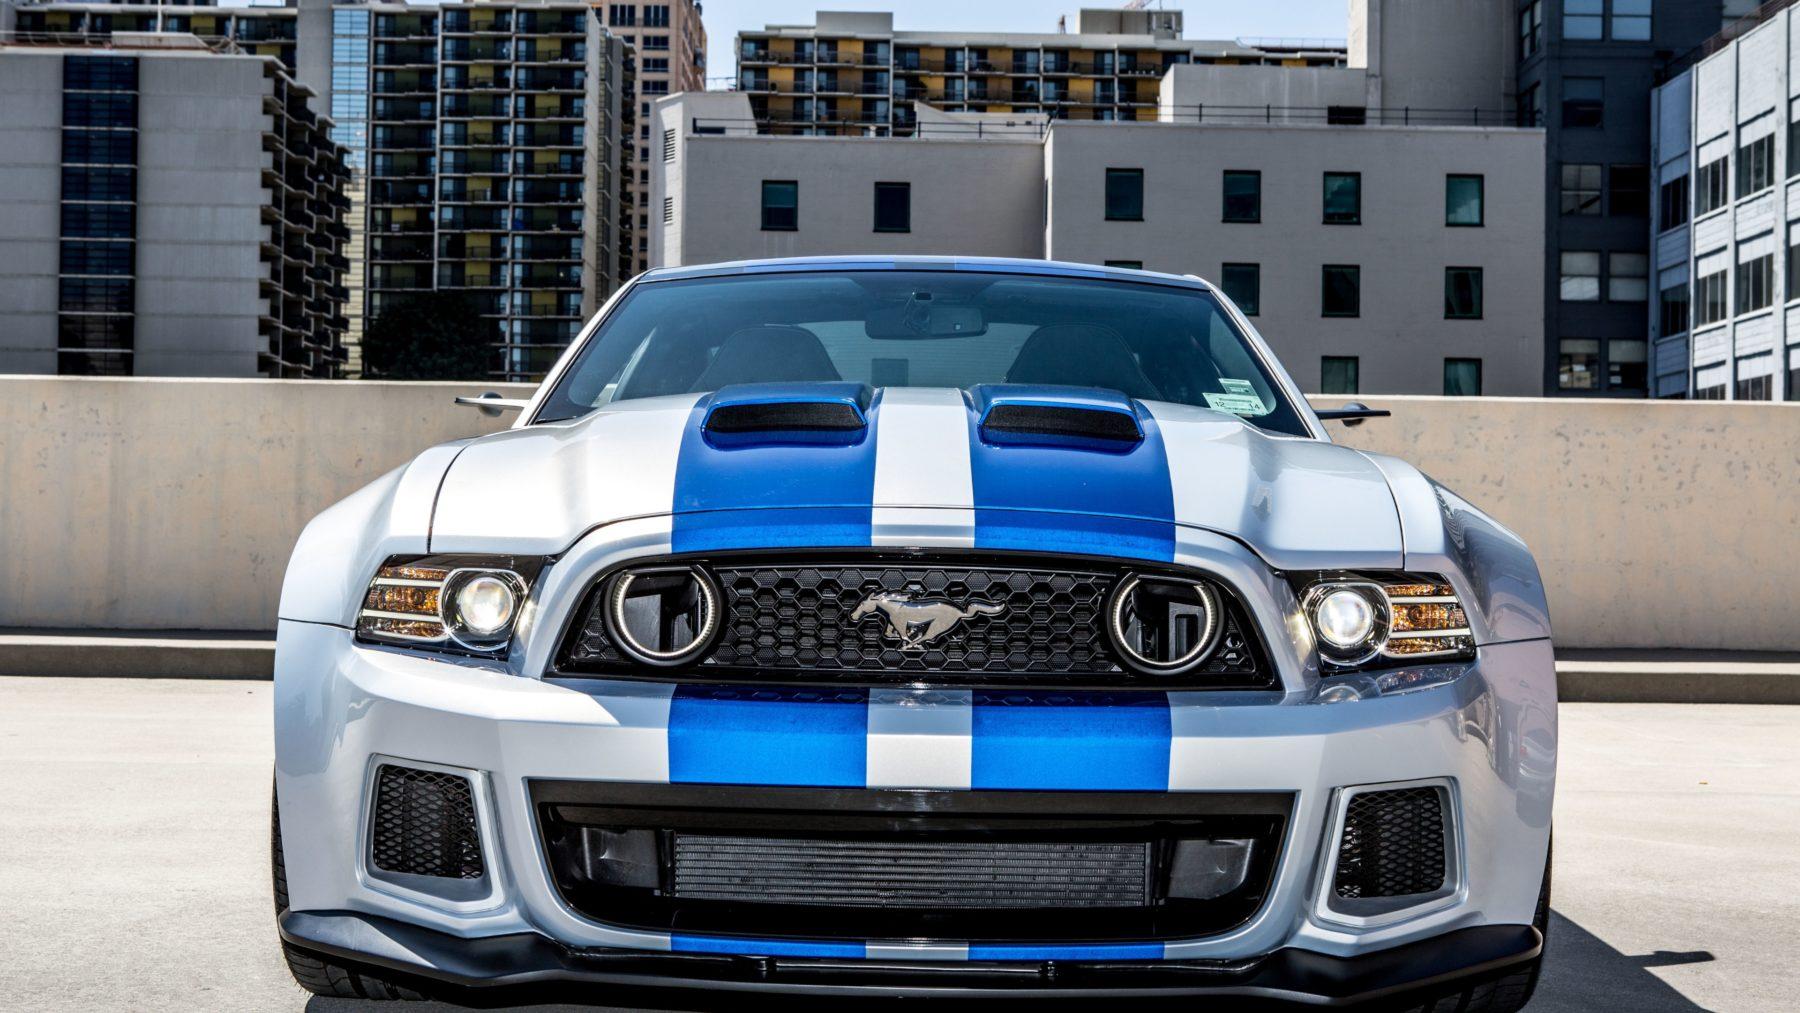 Ford Mustang GT. Front High Resolution Wallpaper. New Car